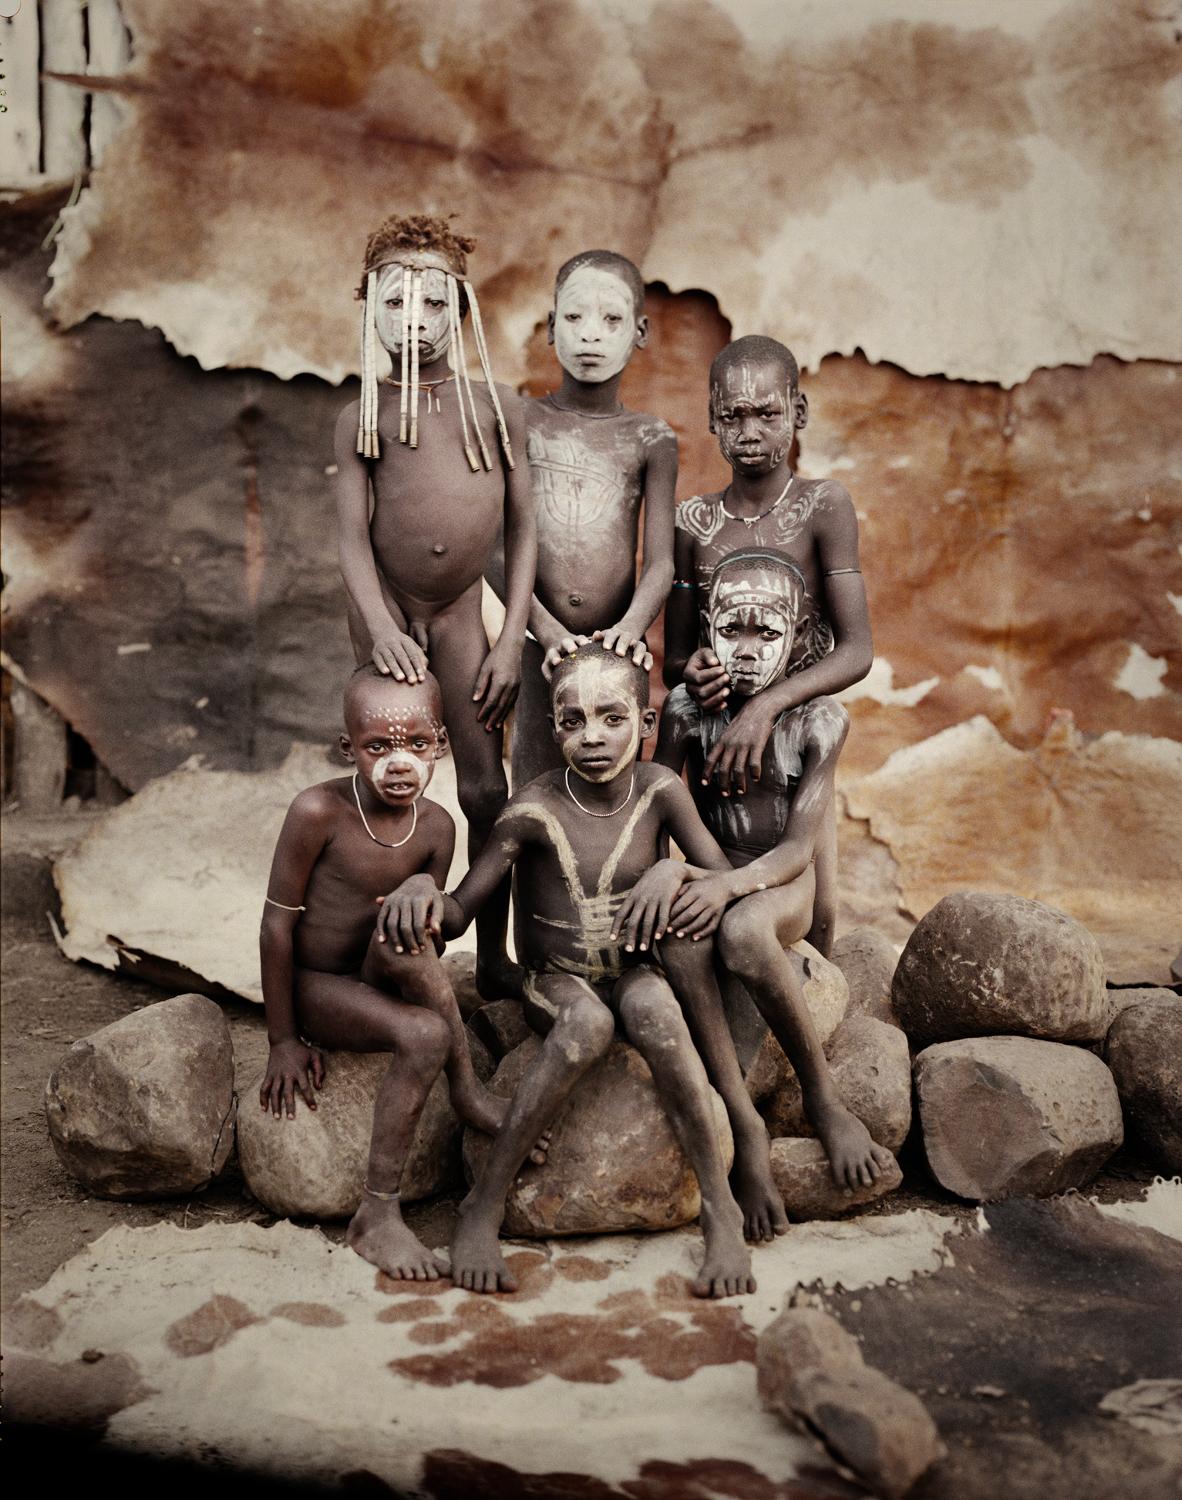 Jimmy Nelson - XI 261 / XI Mursi, Ethiopia, Photography 2011, Printed After